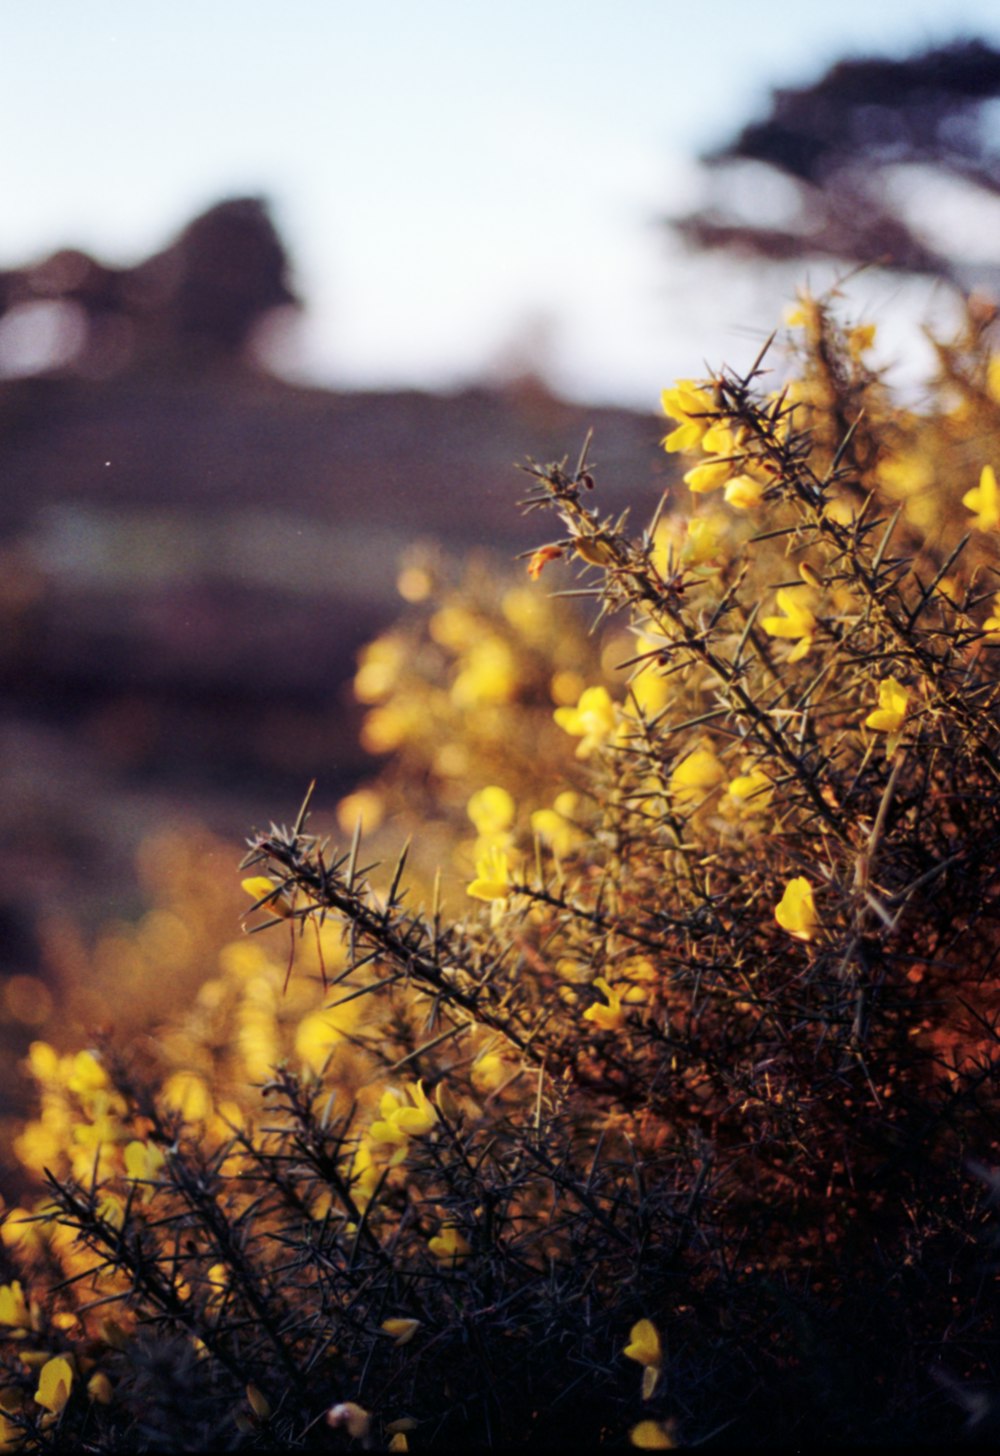 a bush with yellow flowers in the foreground